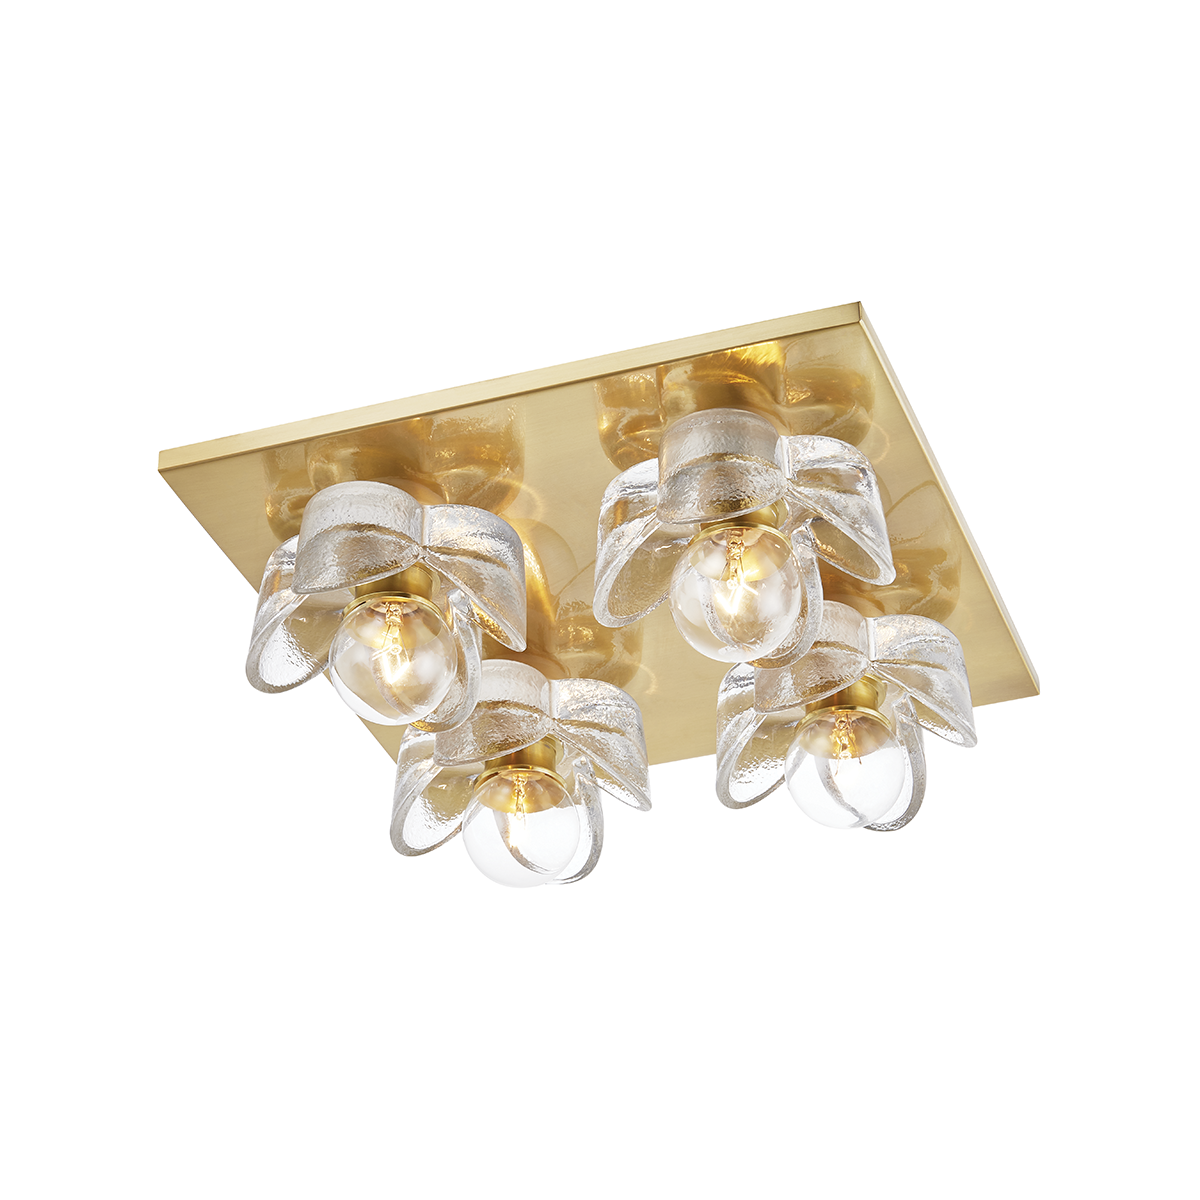 Shea 4 Light Flush Mount-Mitzi-HVL-H410504-AGB-ChandeliersAged Brass-1-France and Son